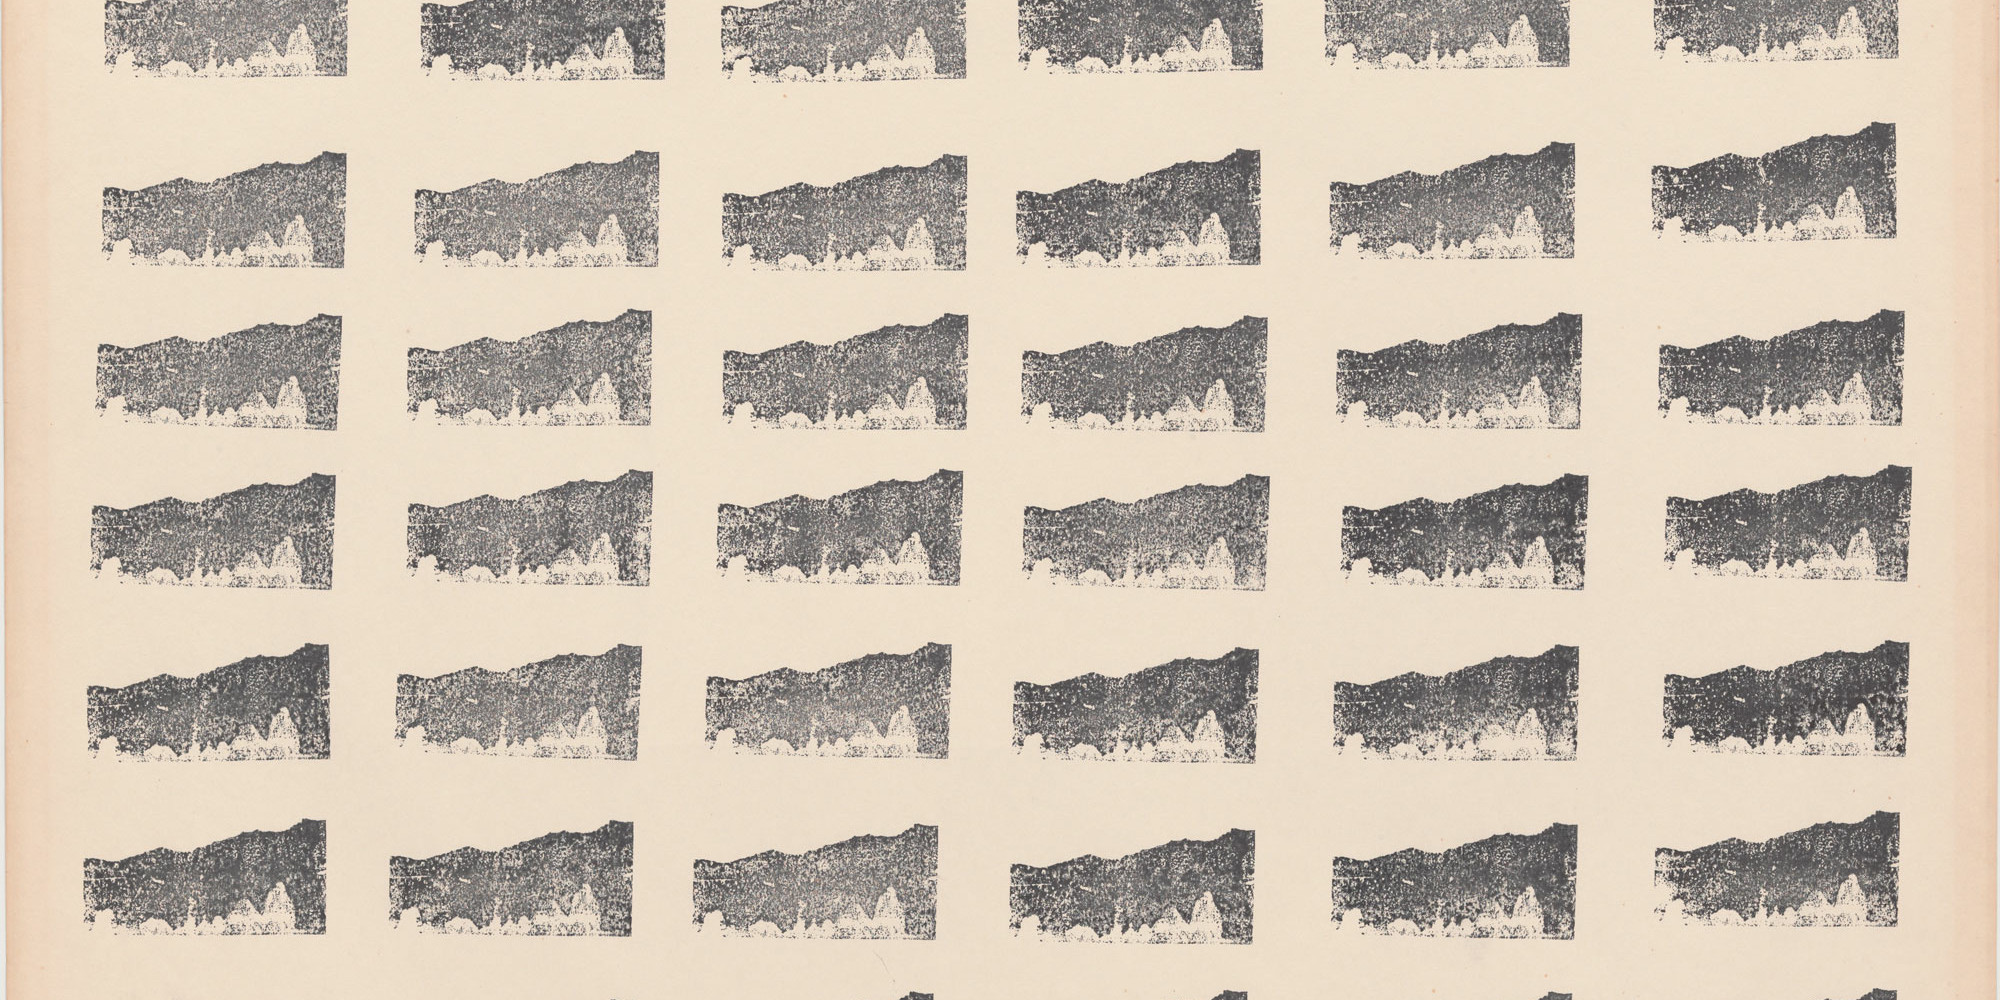 Carmela Gross. Stamp (Carimbo). 1978. Stamped ink on paper, composition (irreg.): 23 1/16 × 36&#34; (58.5 × 91.5 cm); sheet: 27 11/16 × 39 3/16&#34; (70.3 × 99.5 cm). Unique edition. Latin American and Caribbean Fund through gift of Yvonne Dadoo de Lewis